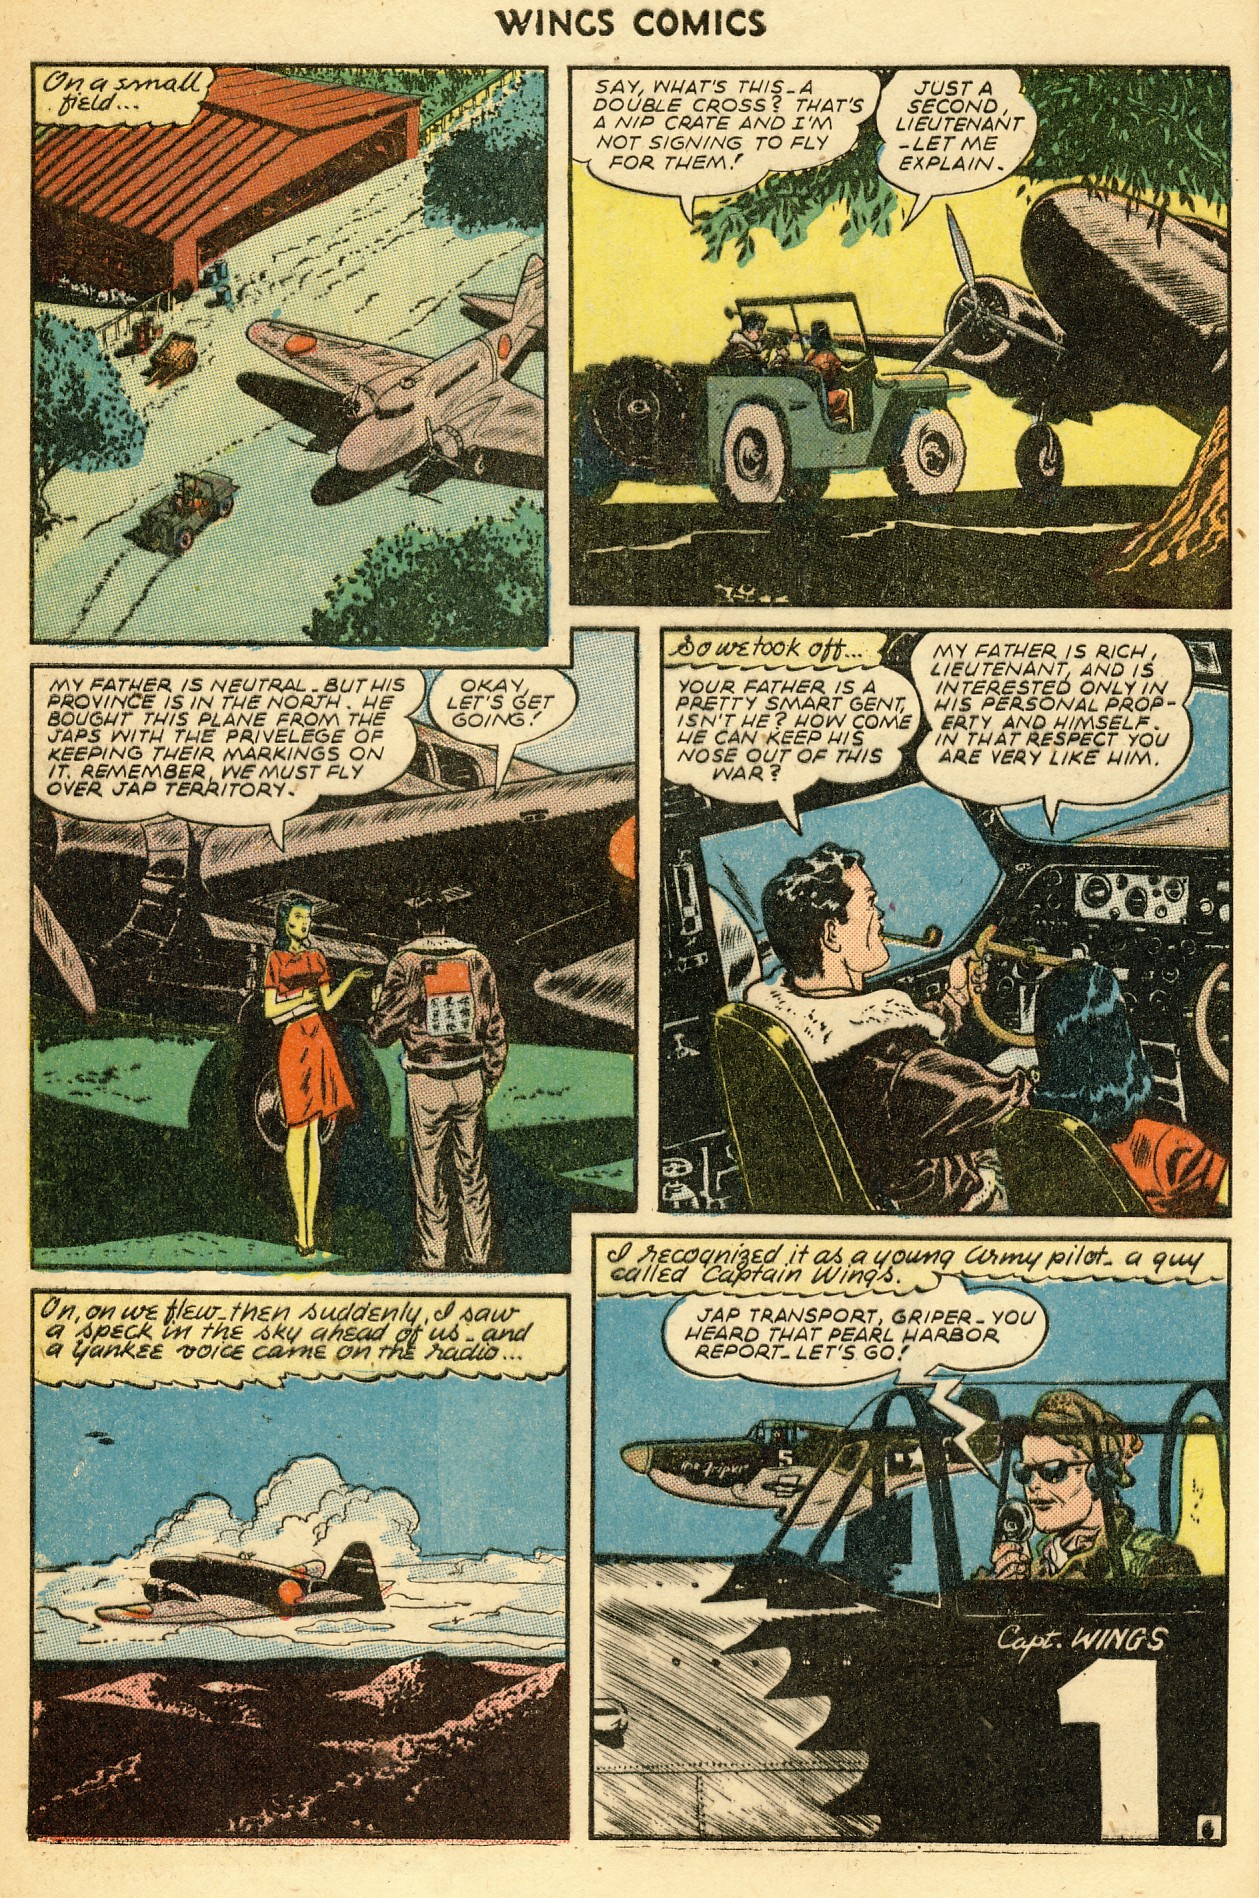 Read online Wings Comics comic -  Issue #60 - 8